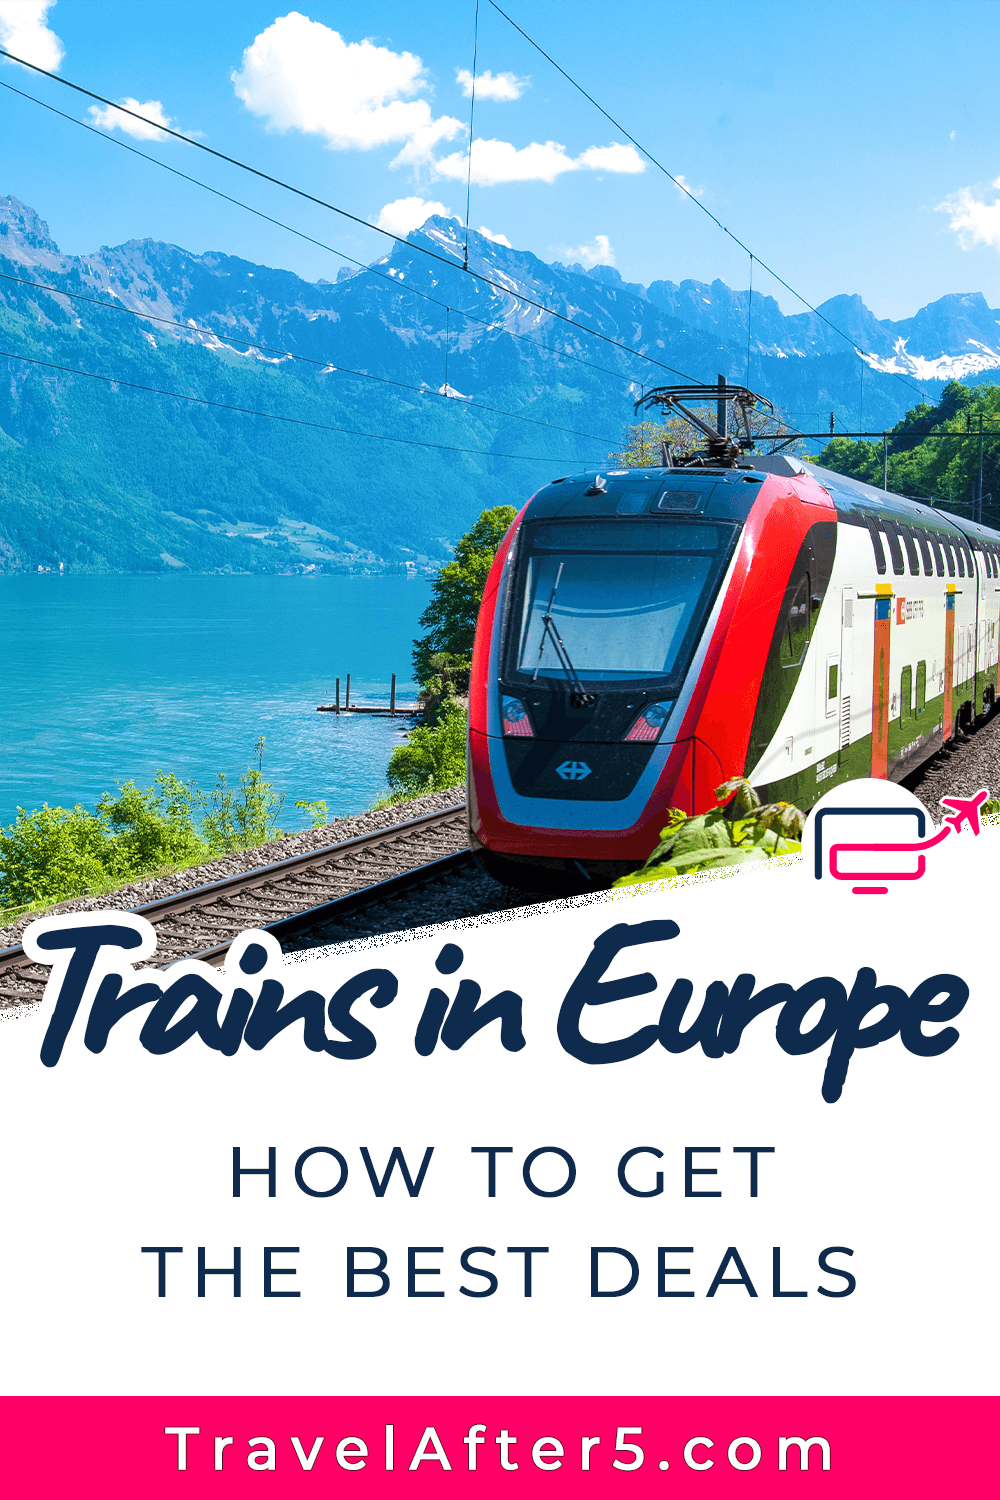 Pinterest Pin to Trains in Europe How to Get the Best Deals, by Travel After 5